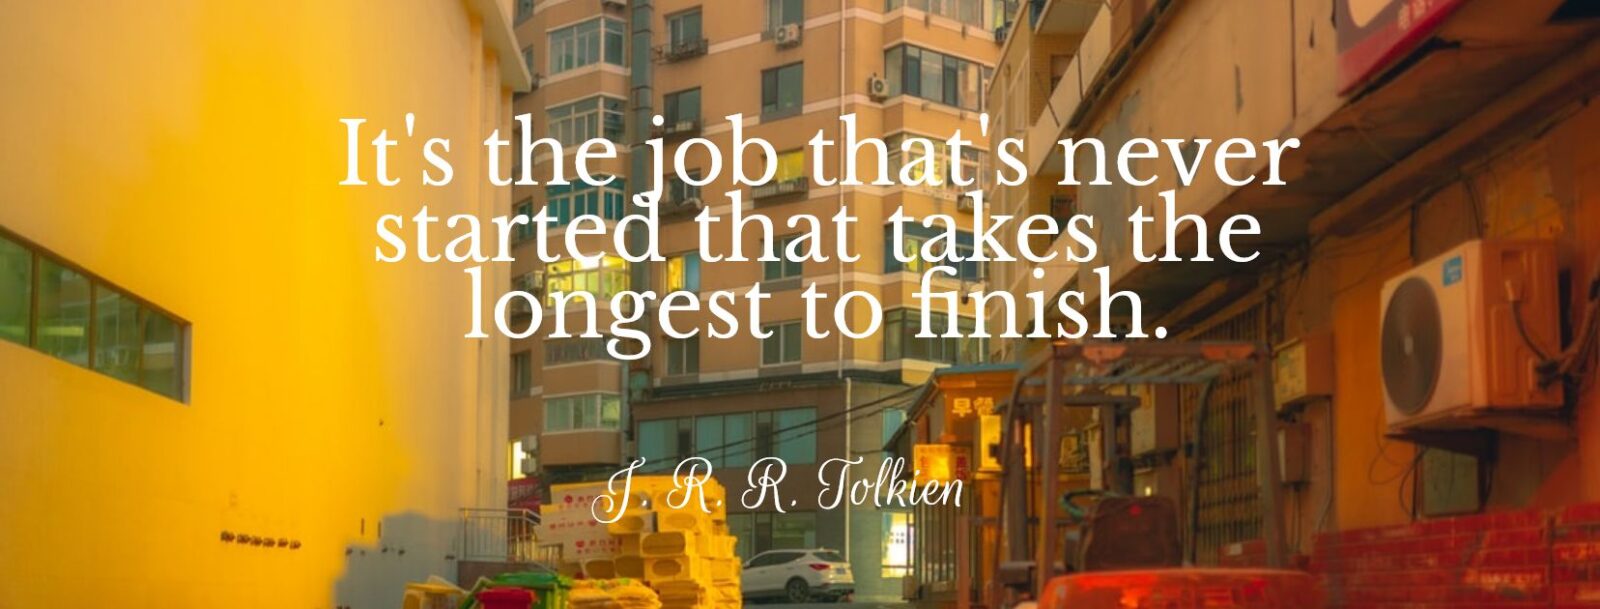 Its the job that never started quote by JRR Tolkien